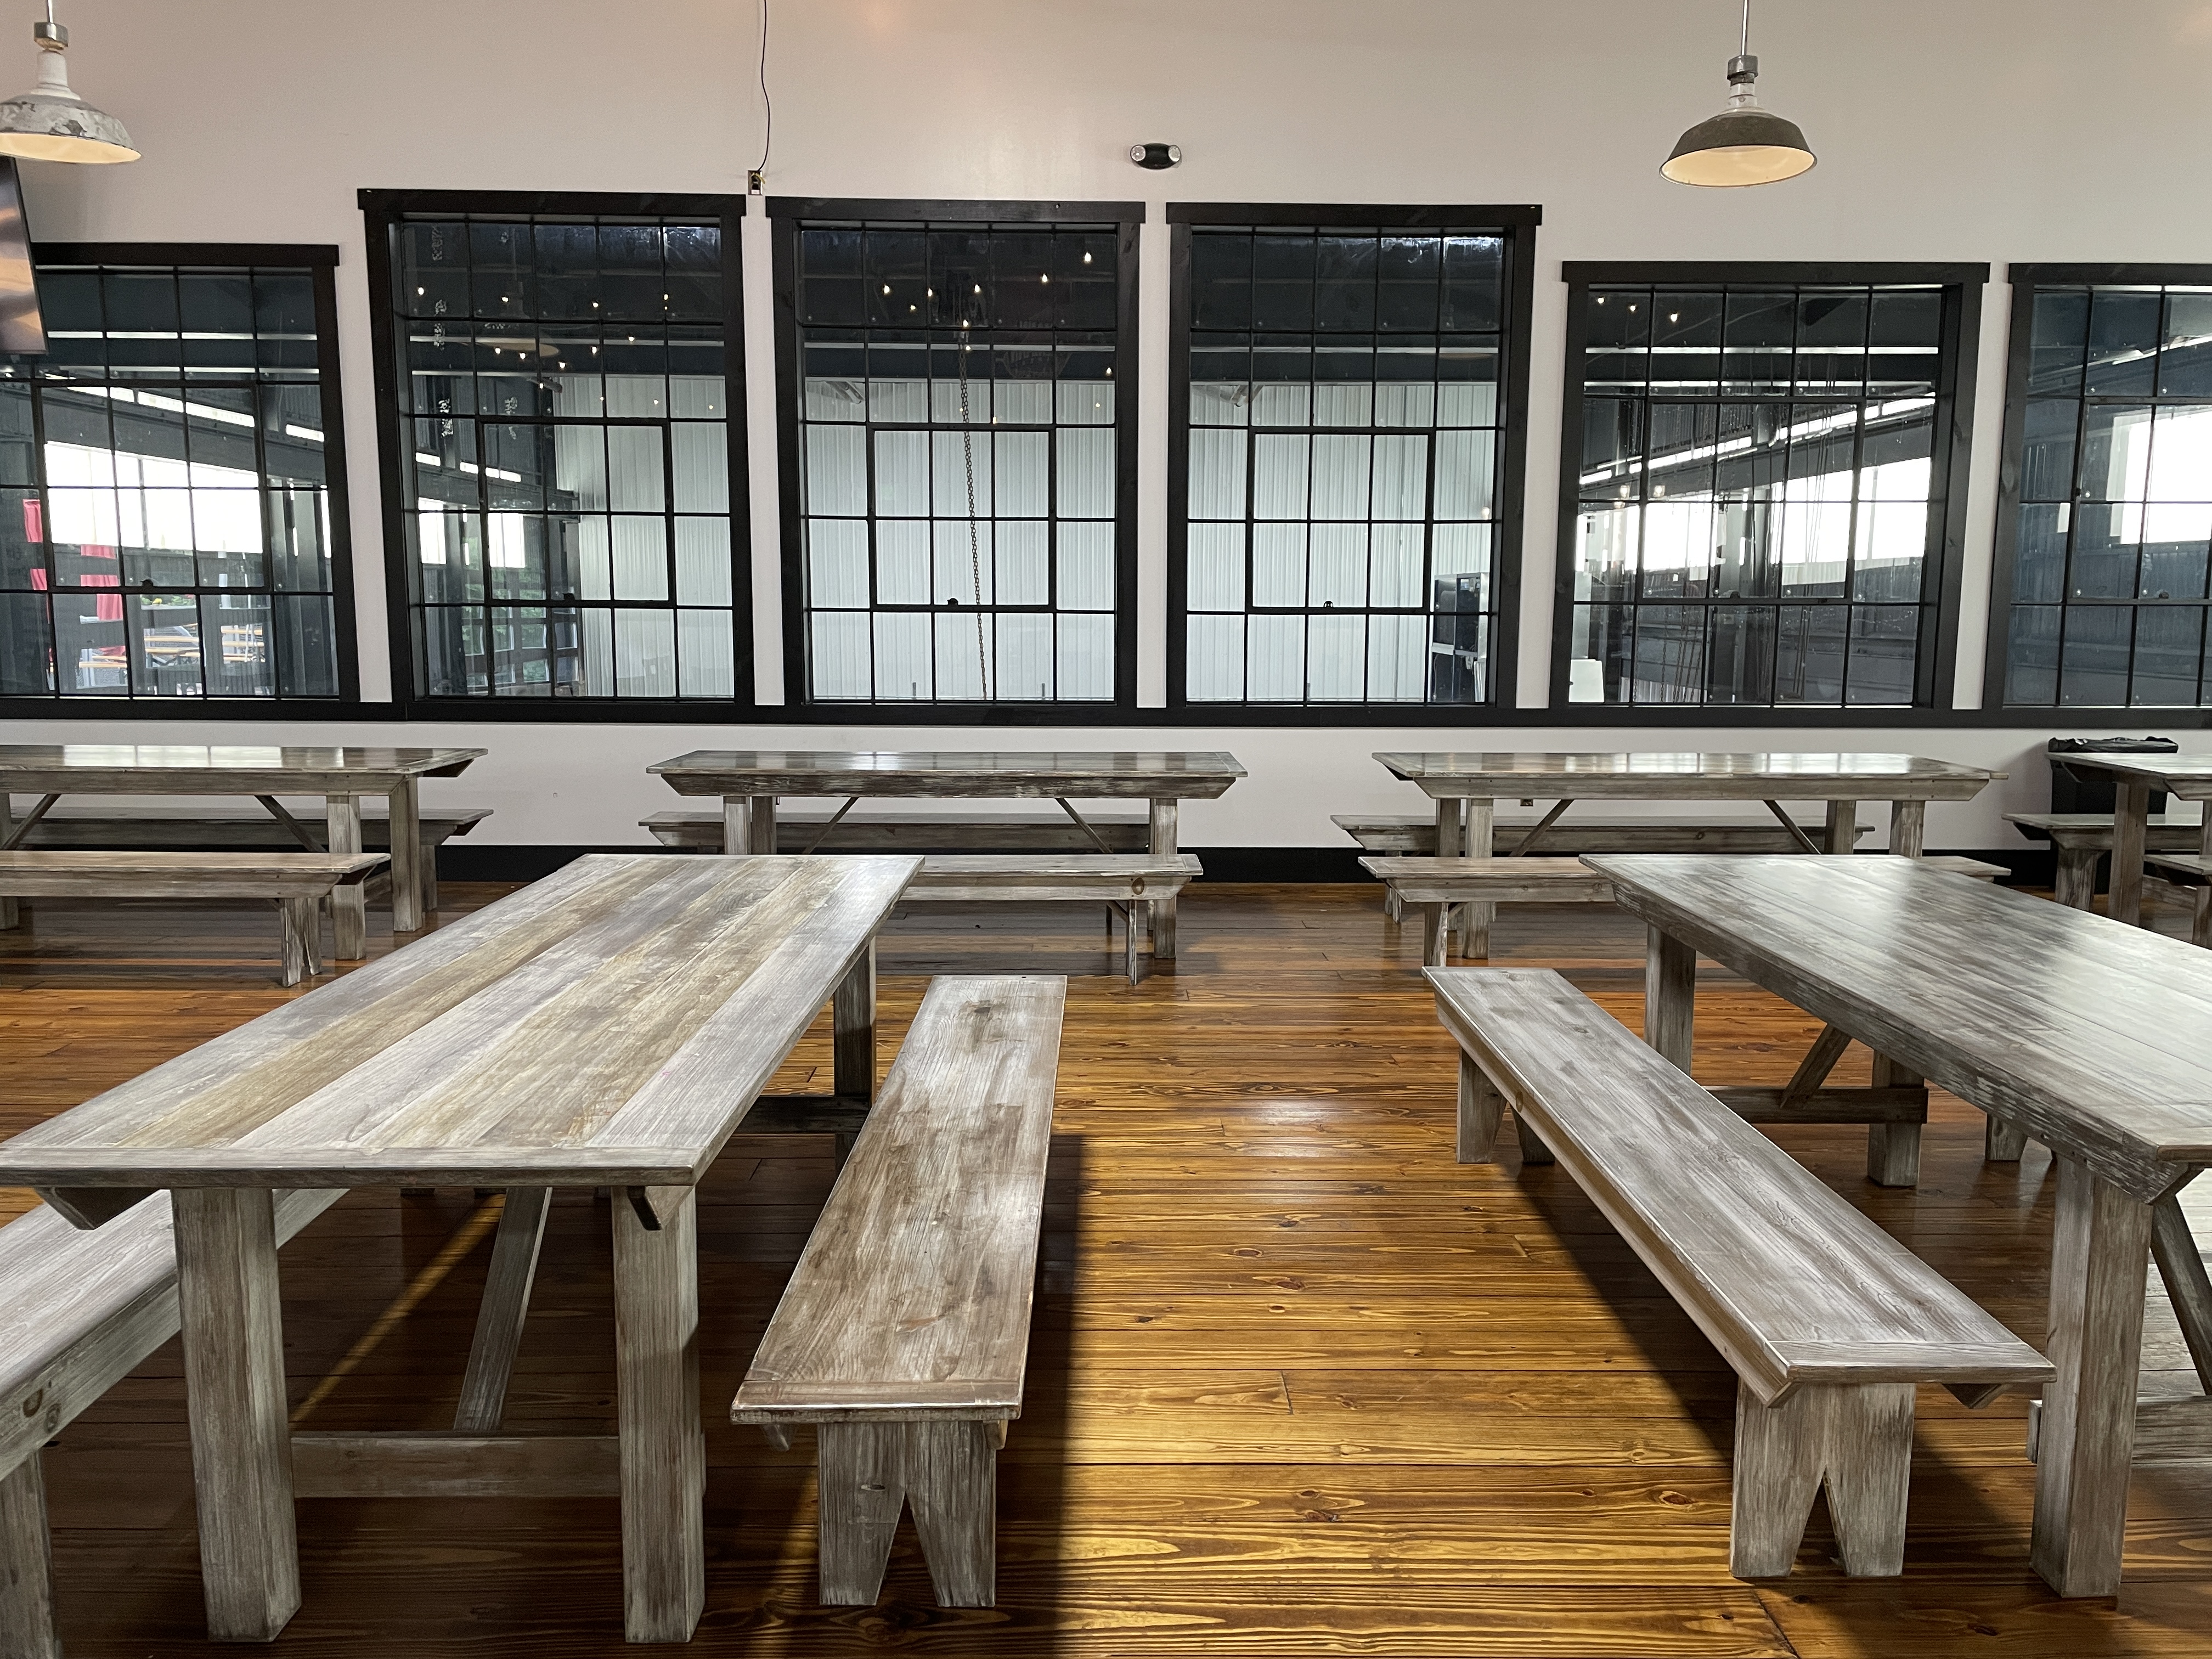 Axemann Brewery seating indoor